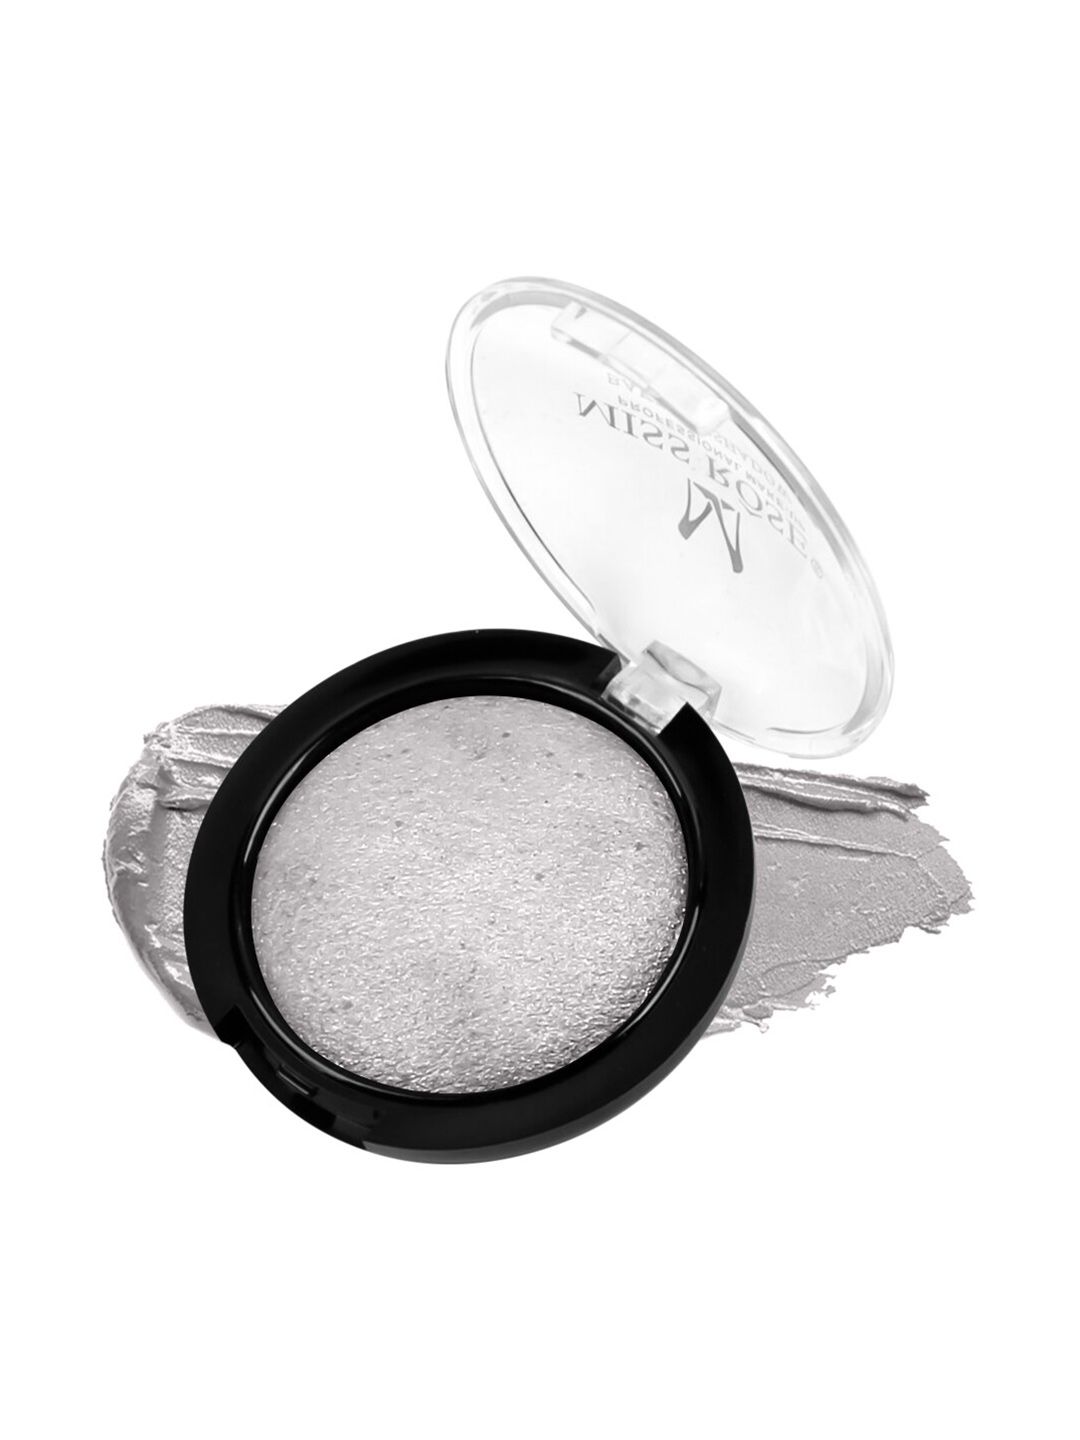 Miss Rose MonochroMe Baked Eyeshadow 7001-073M 07 Price in India